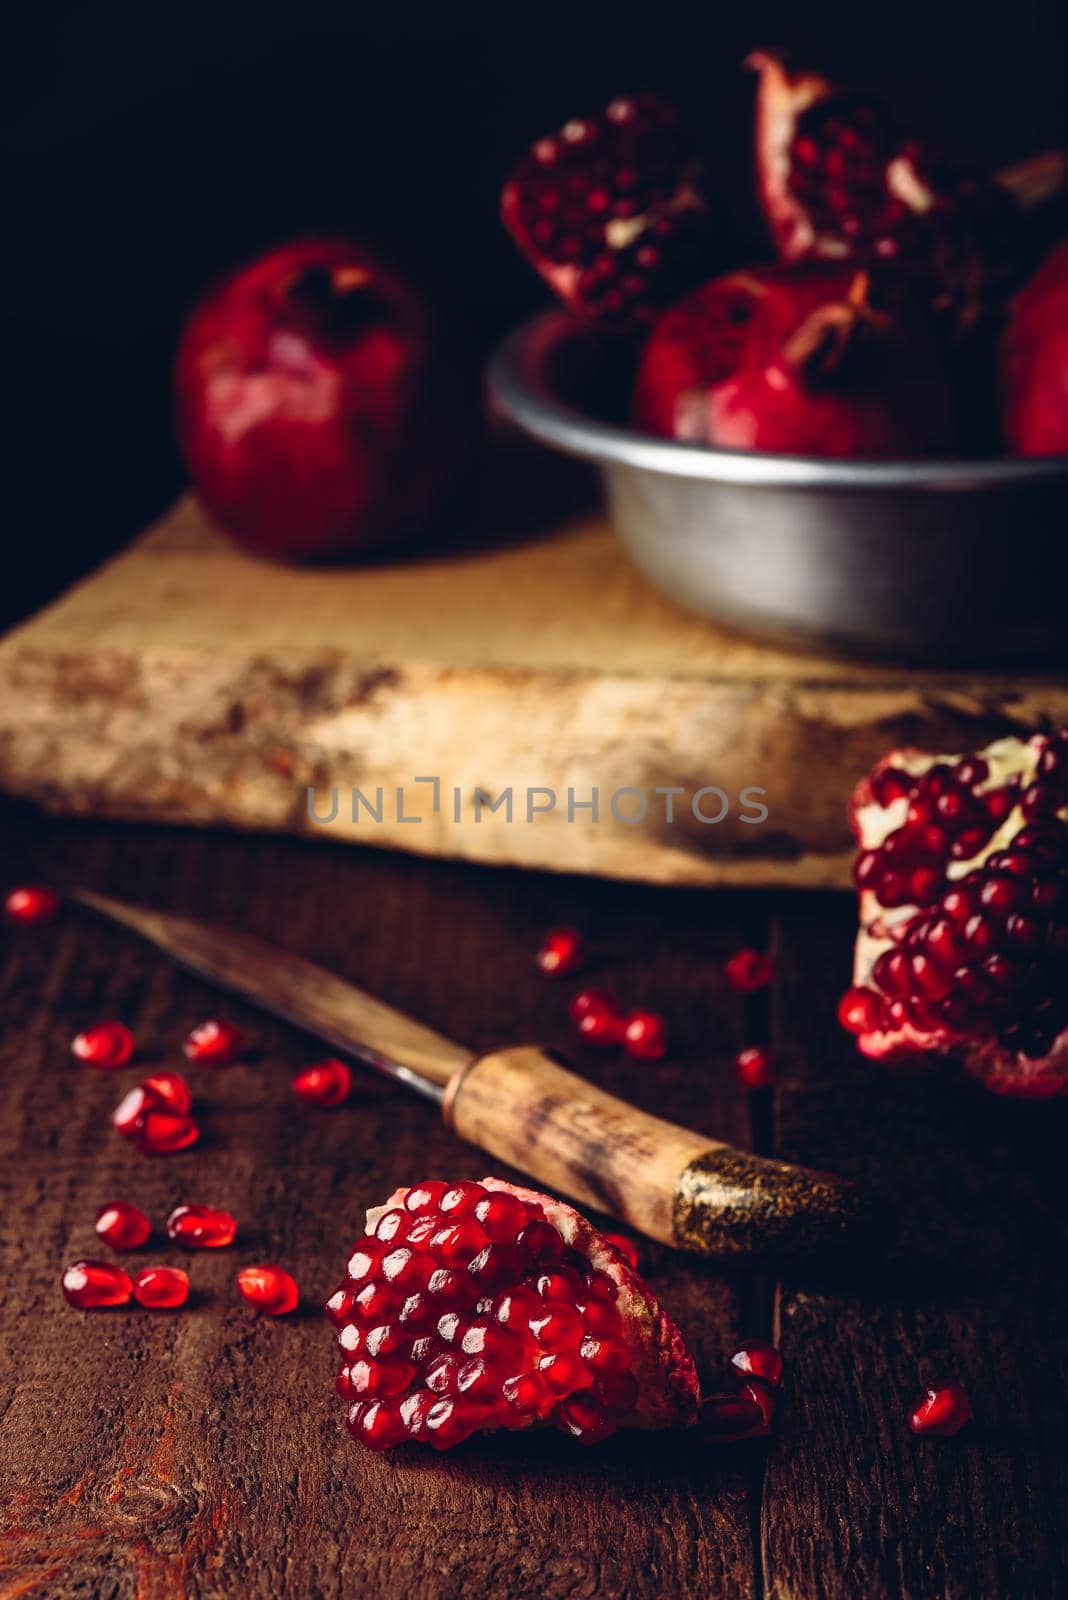 Pomegranate fruits with knife on wooden table by Seva_blsv